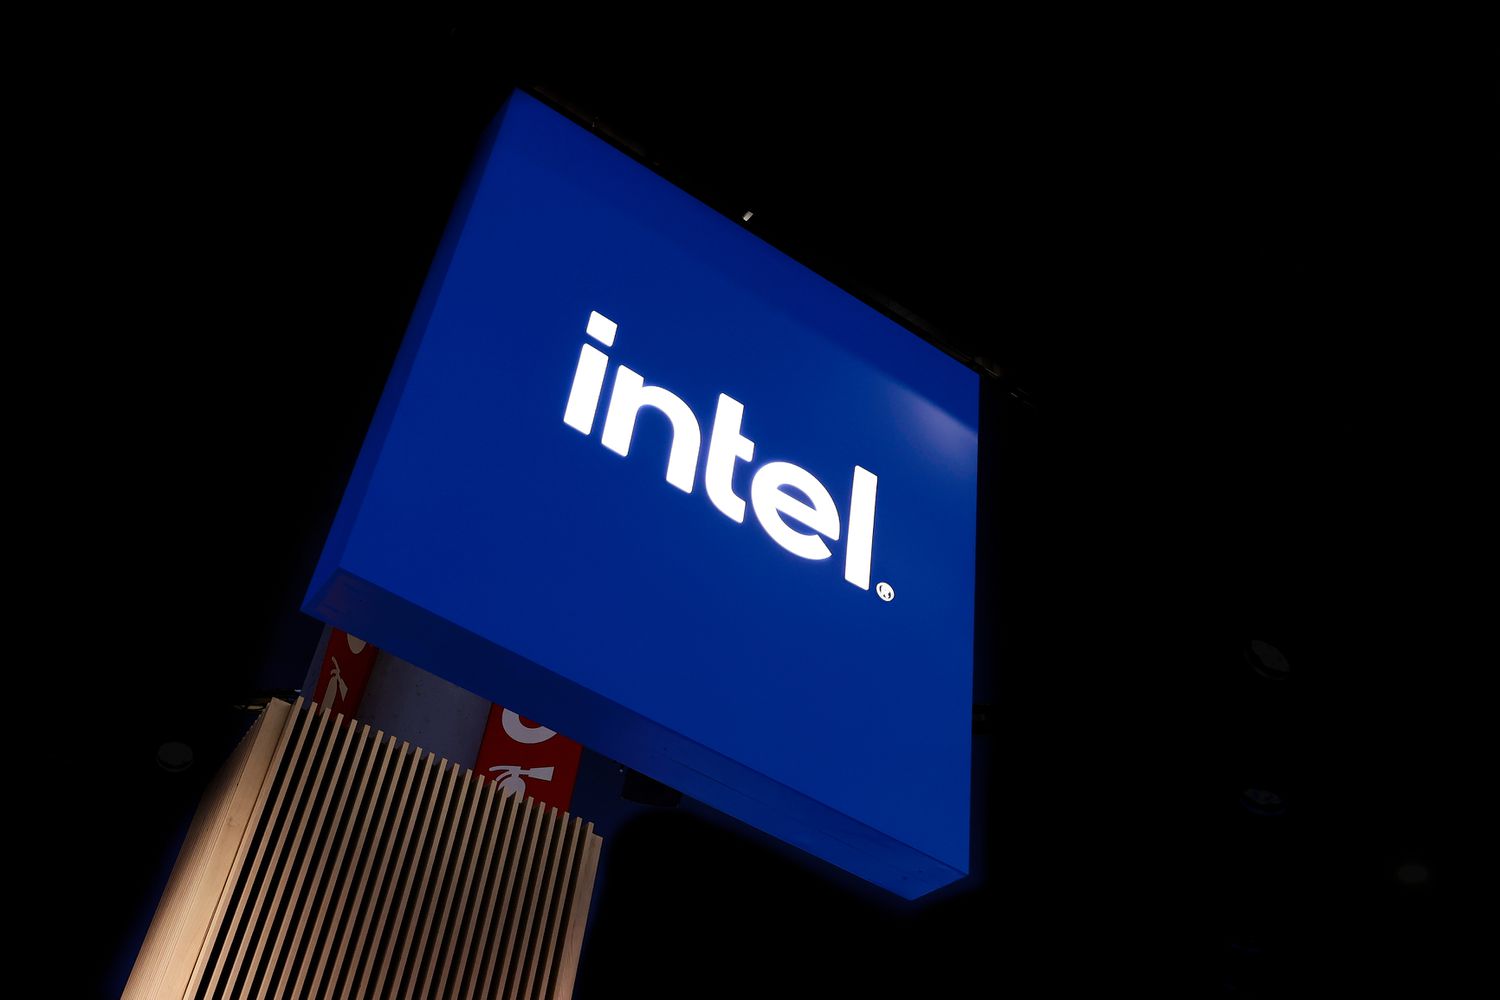 What You Need To Know Ahead of Intel’s Earnings Report Thursday [Video]